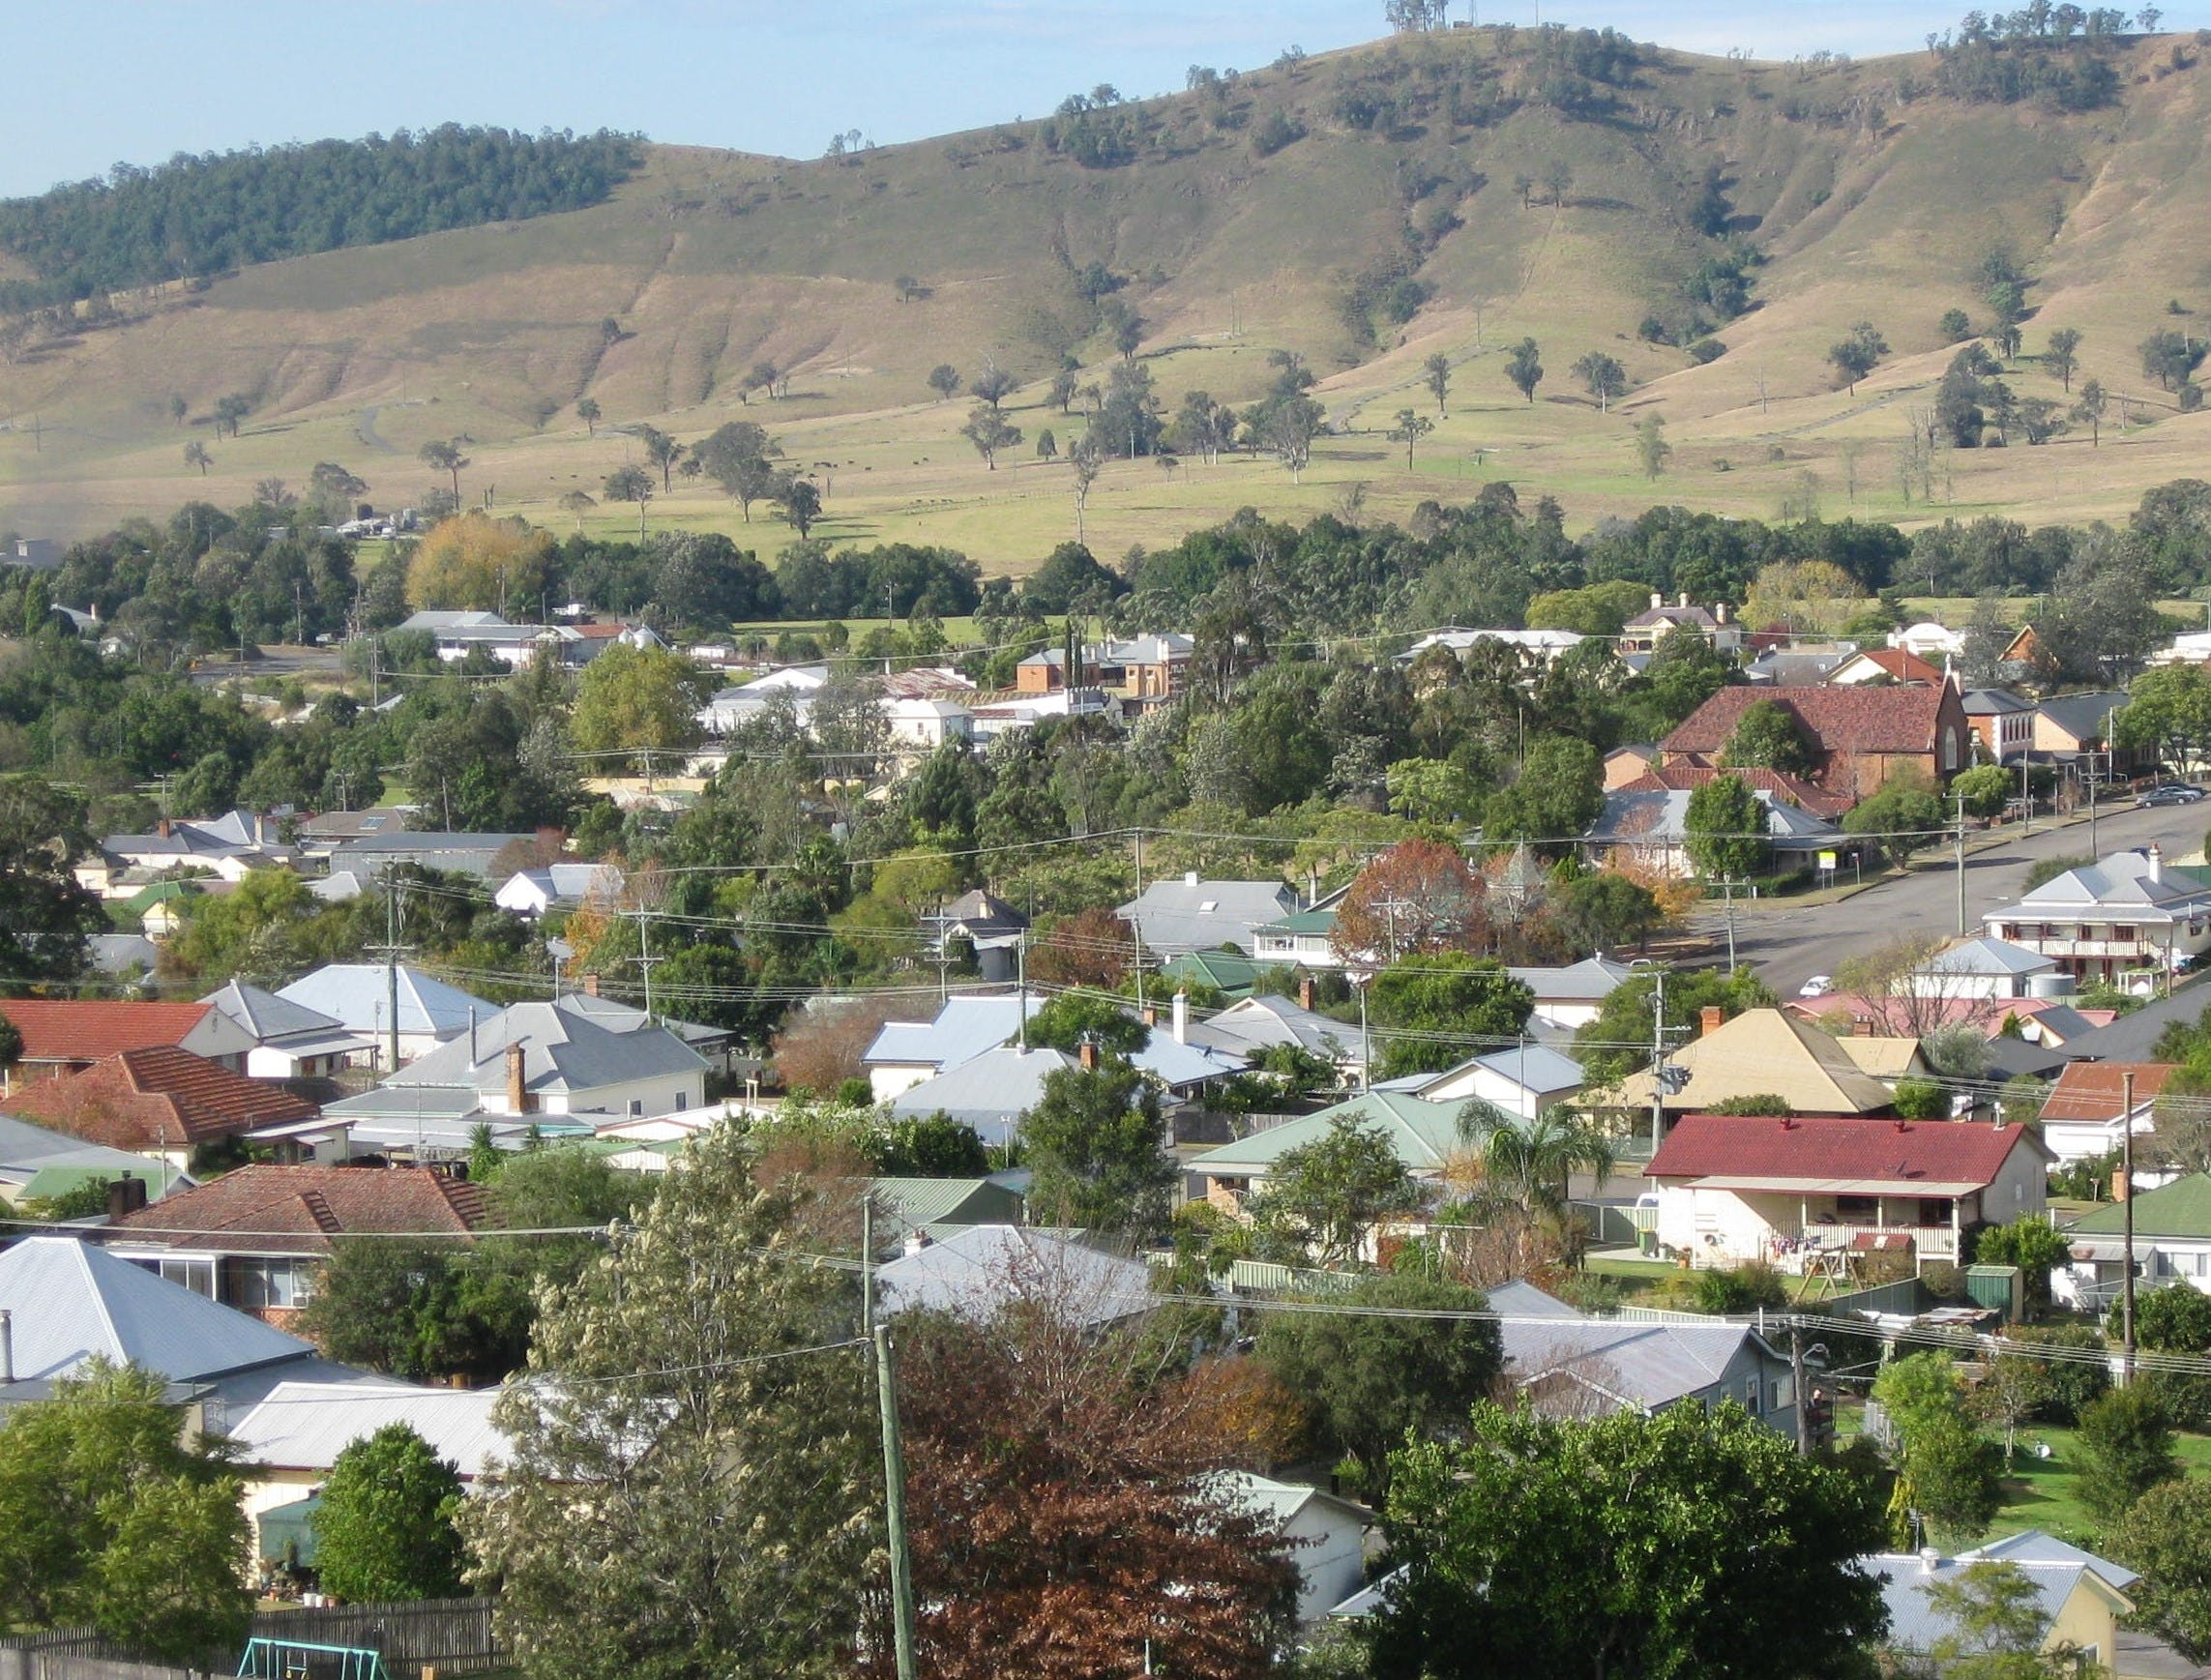 Dungog - Find Attractions